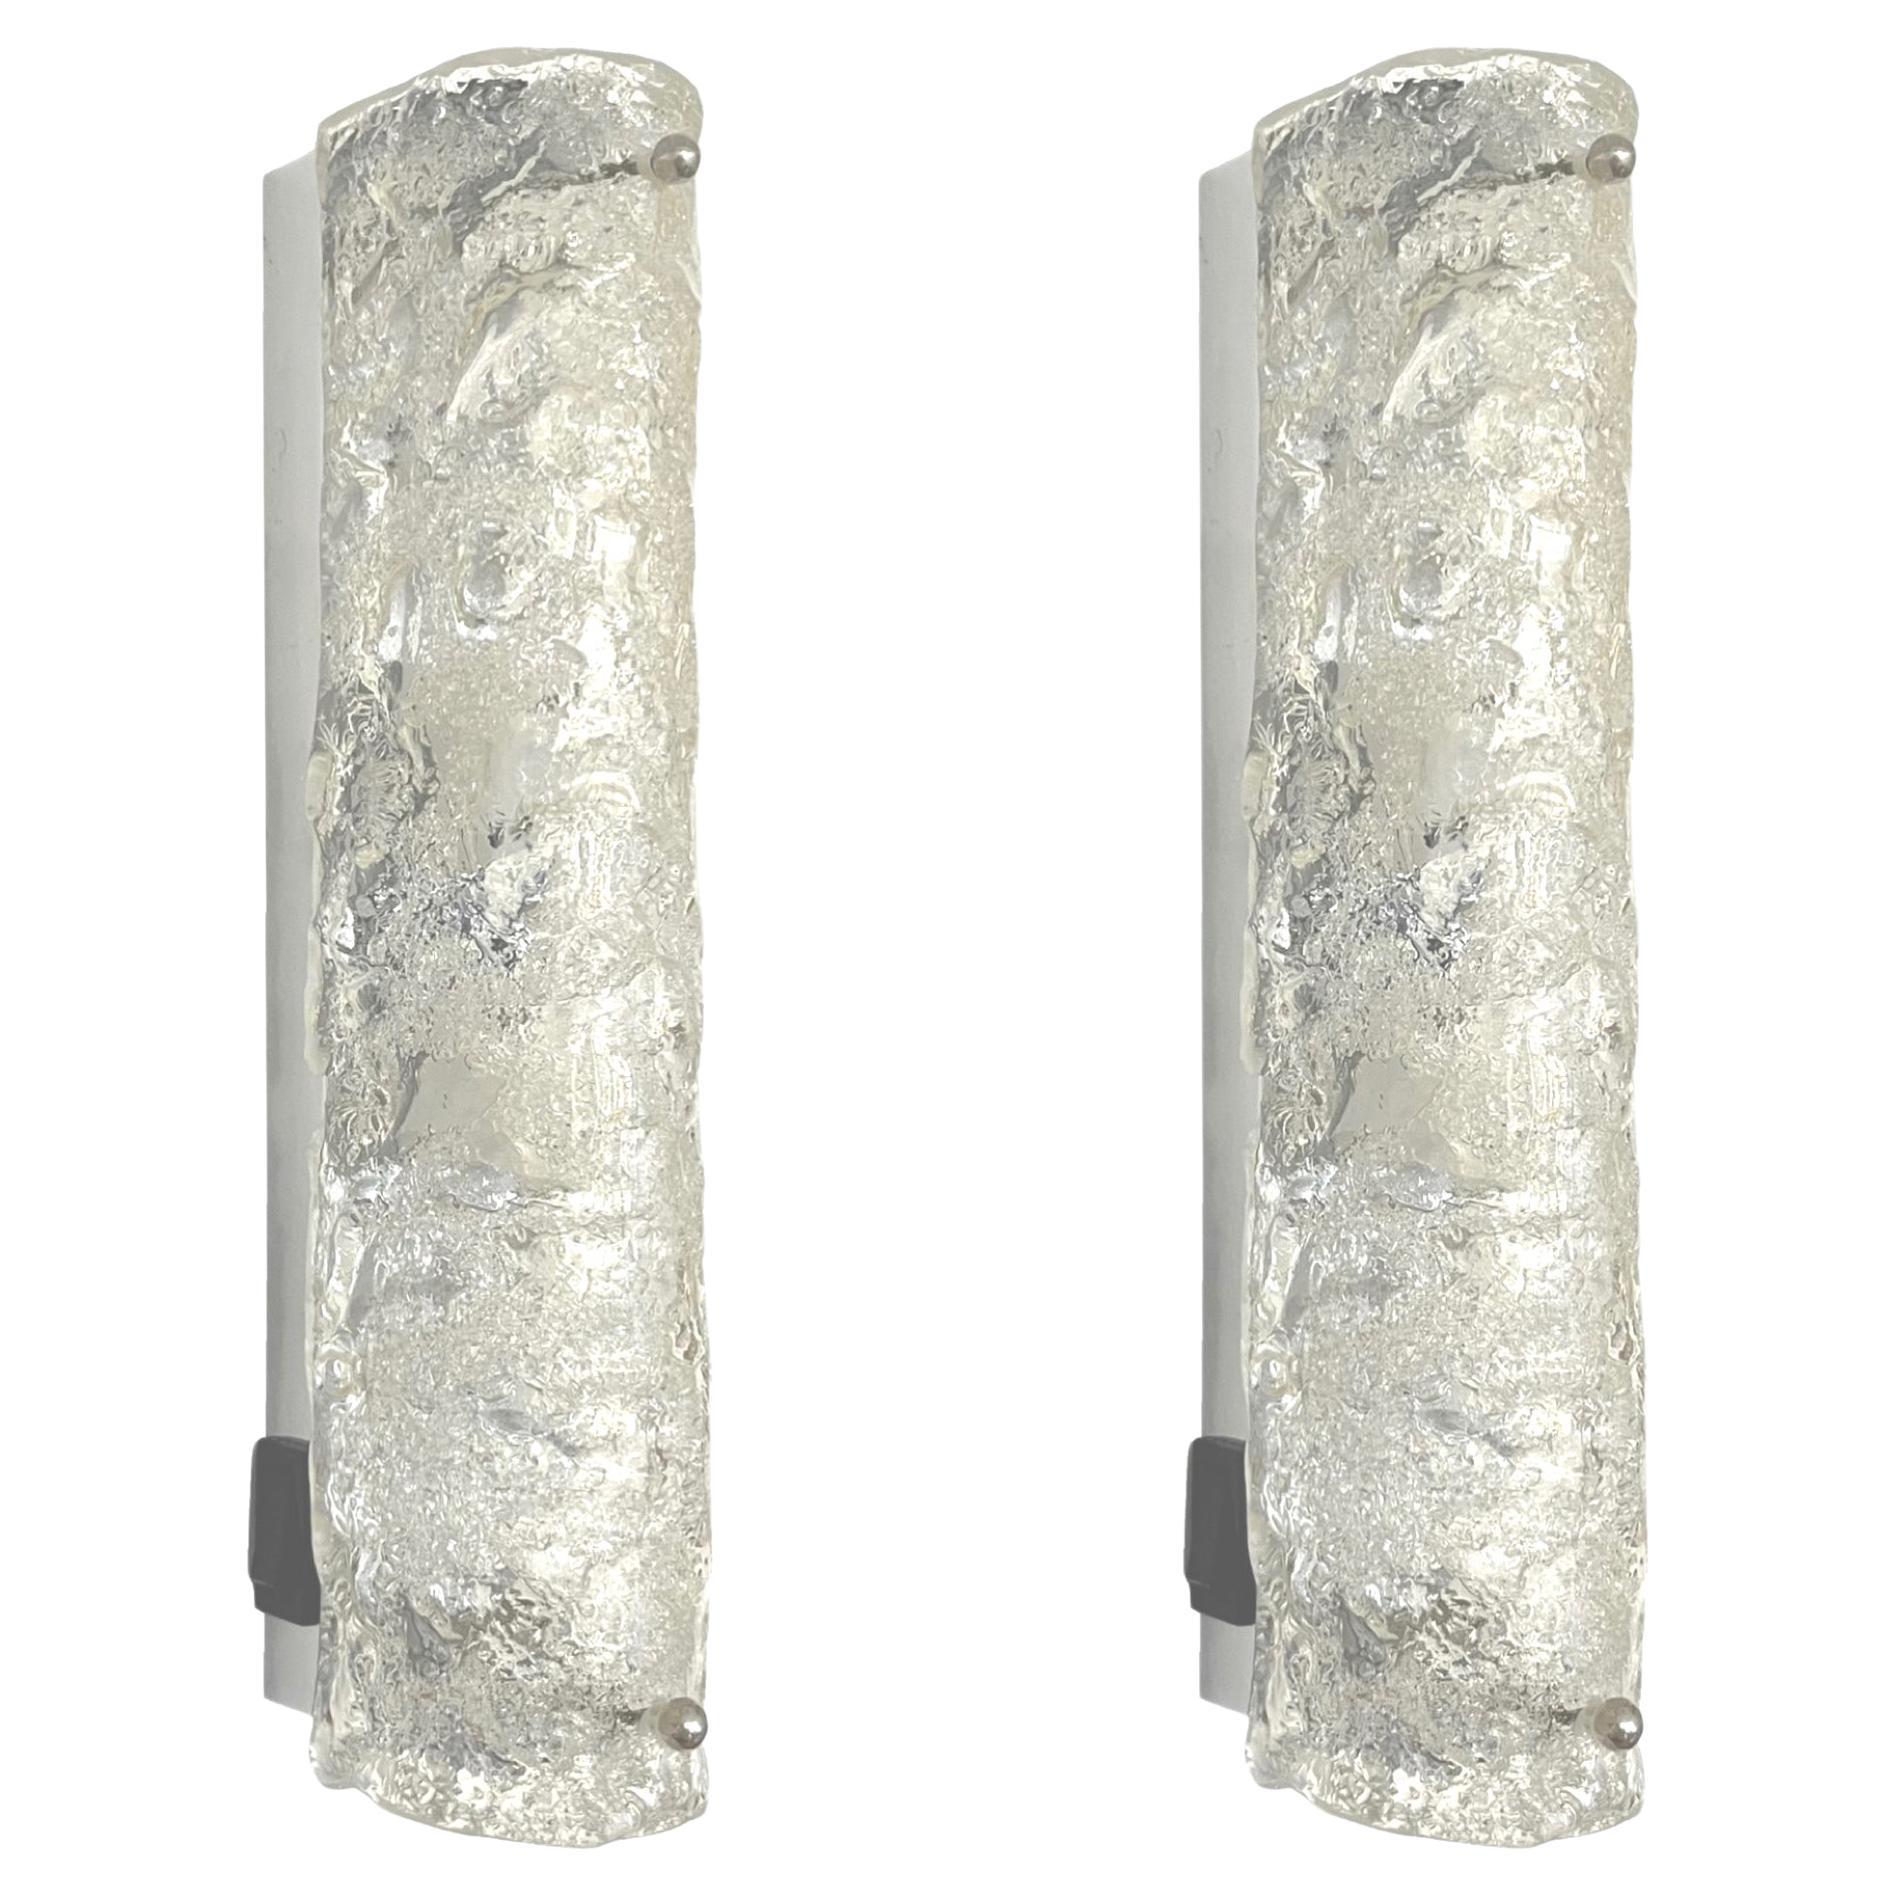 German Midcenturry Pair of Murano Ice-Glass Wall Sconces by Hillebrand, 1970s For Sale